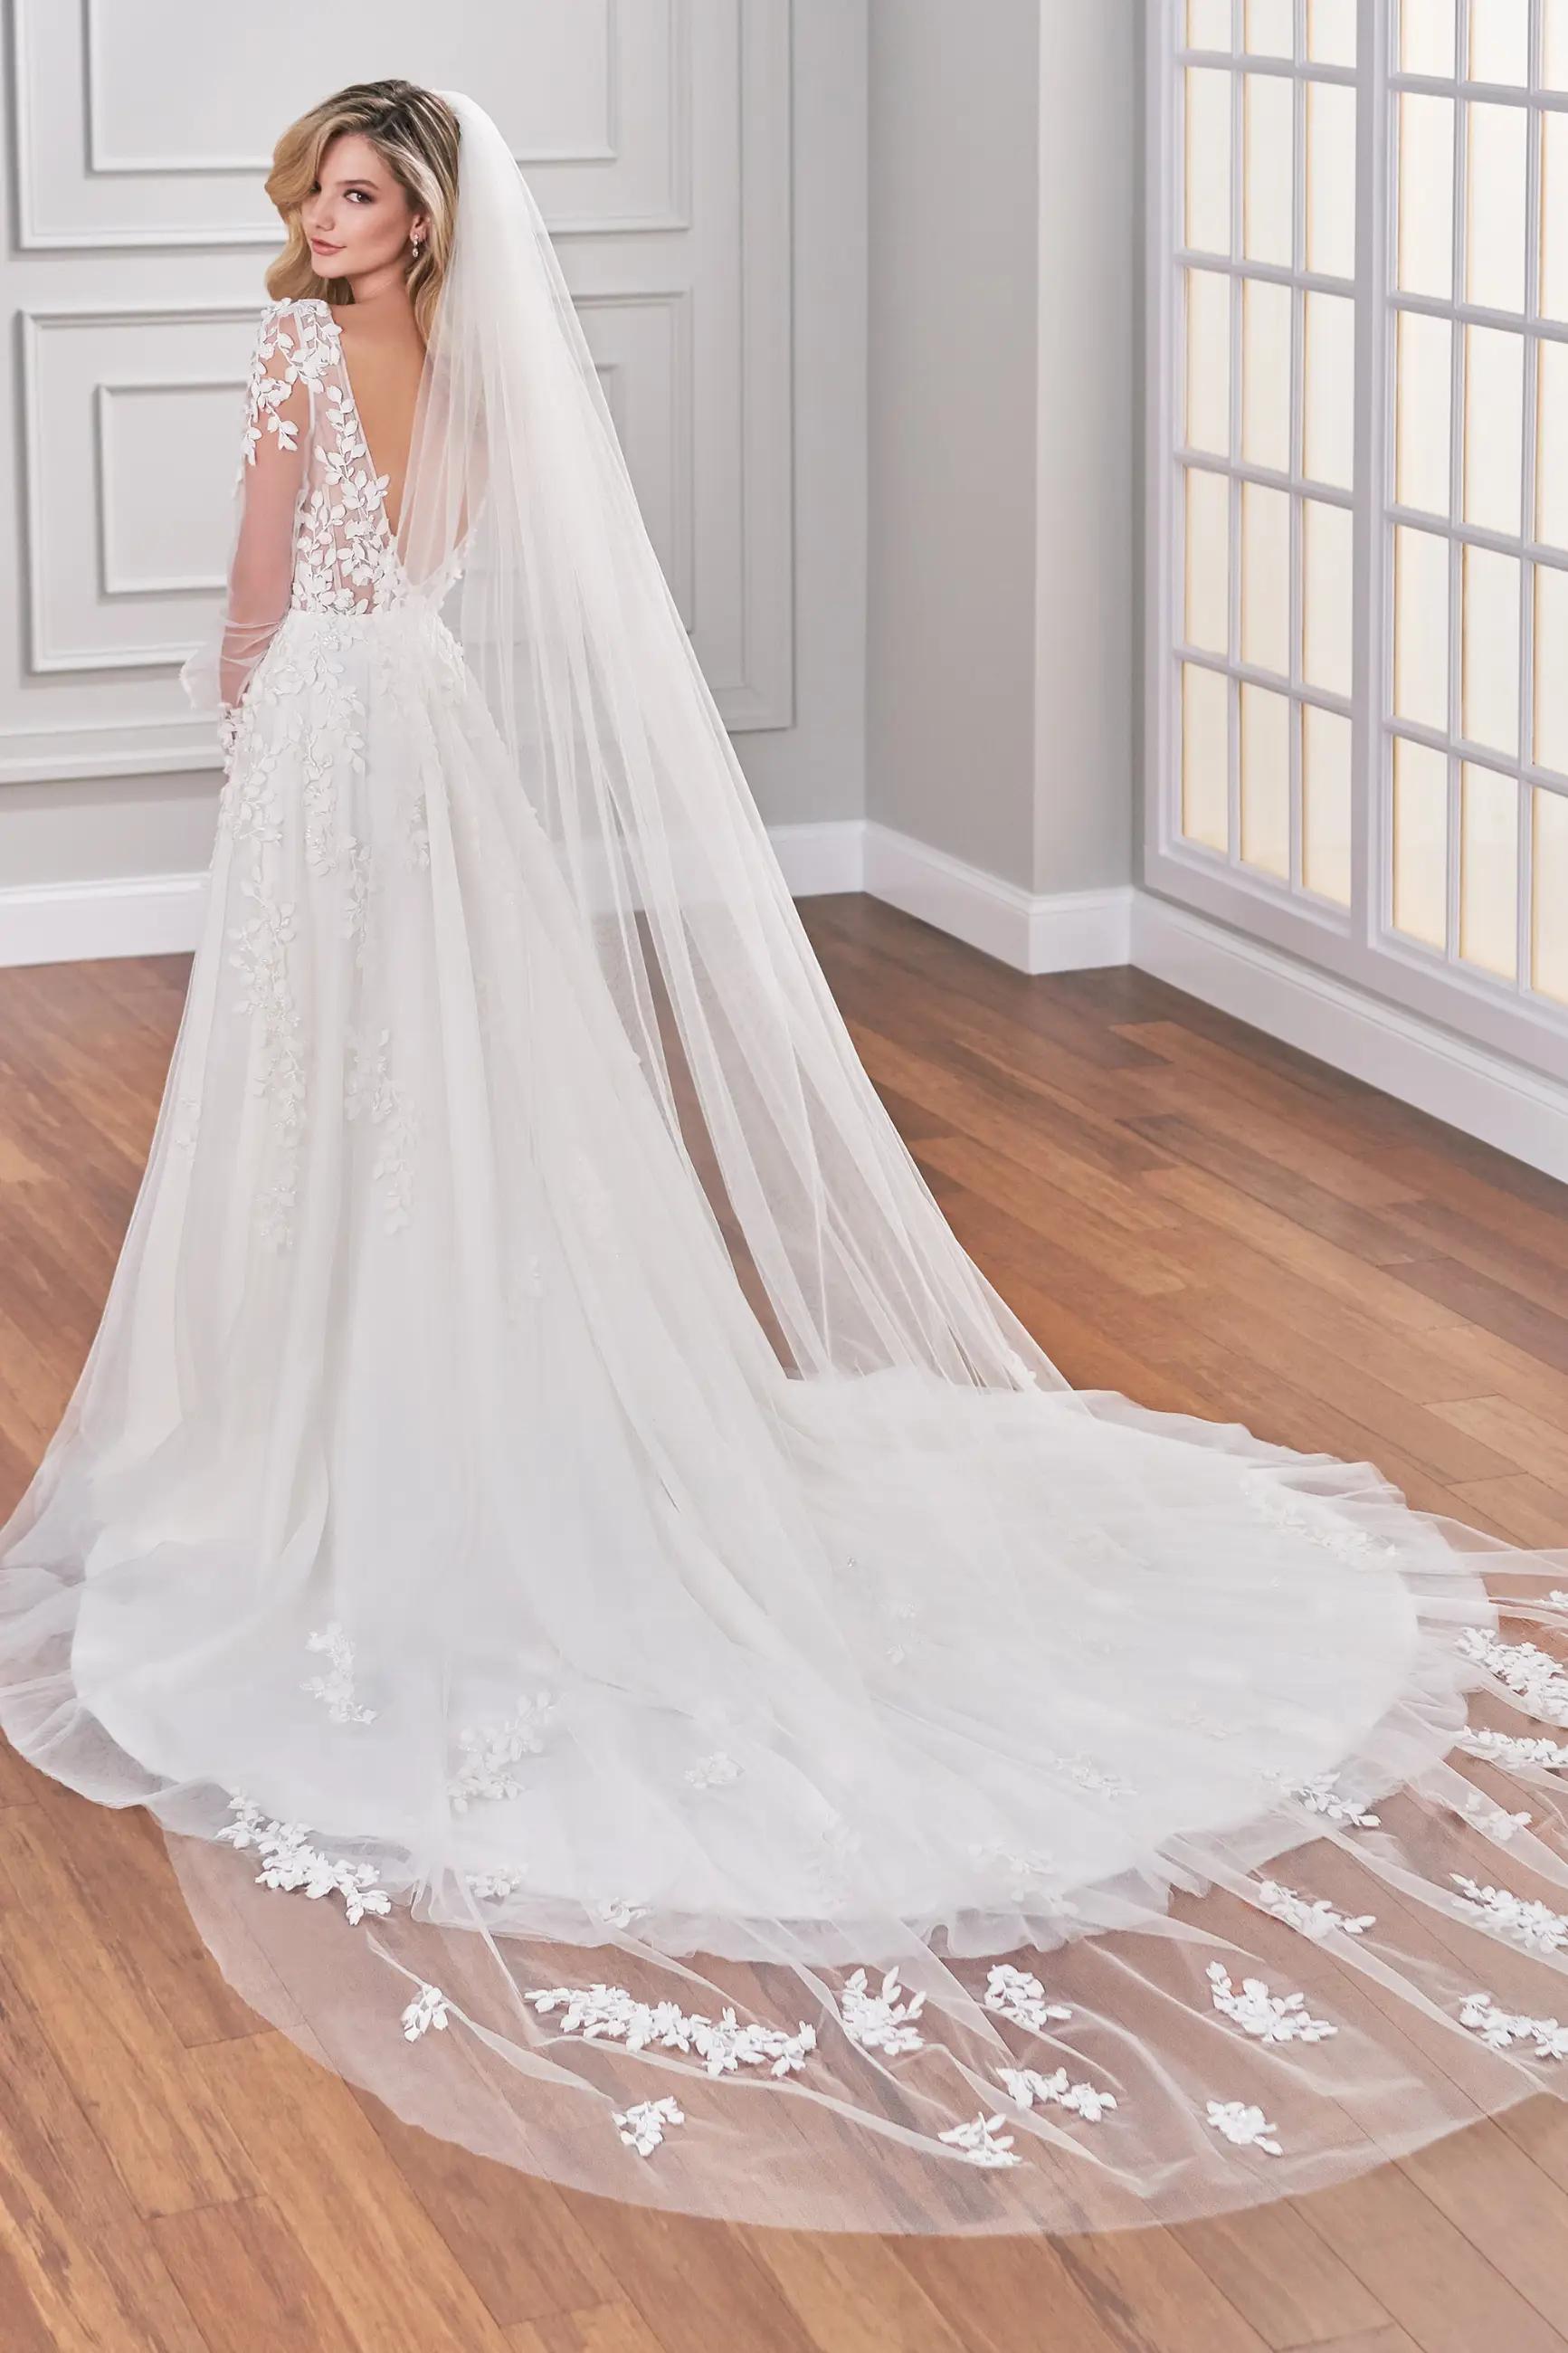 Lace and Grace: Incorporating Lace Details into Your Bridal Look Image #1